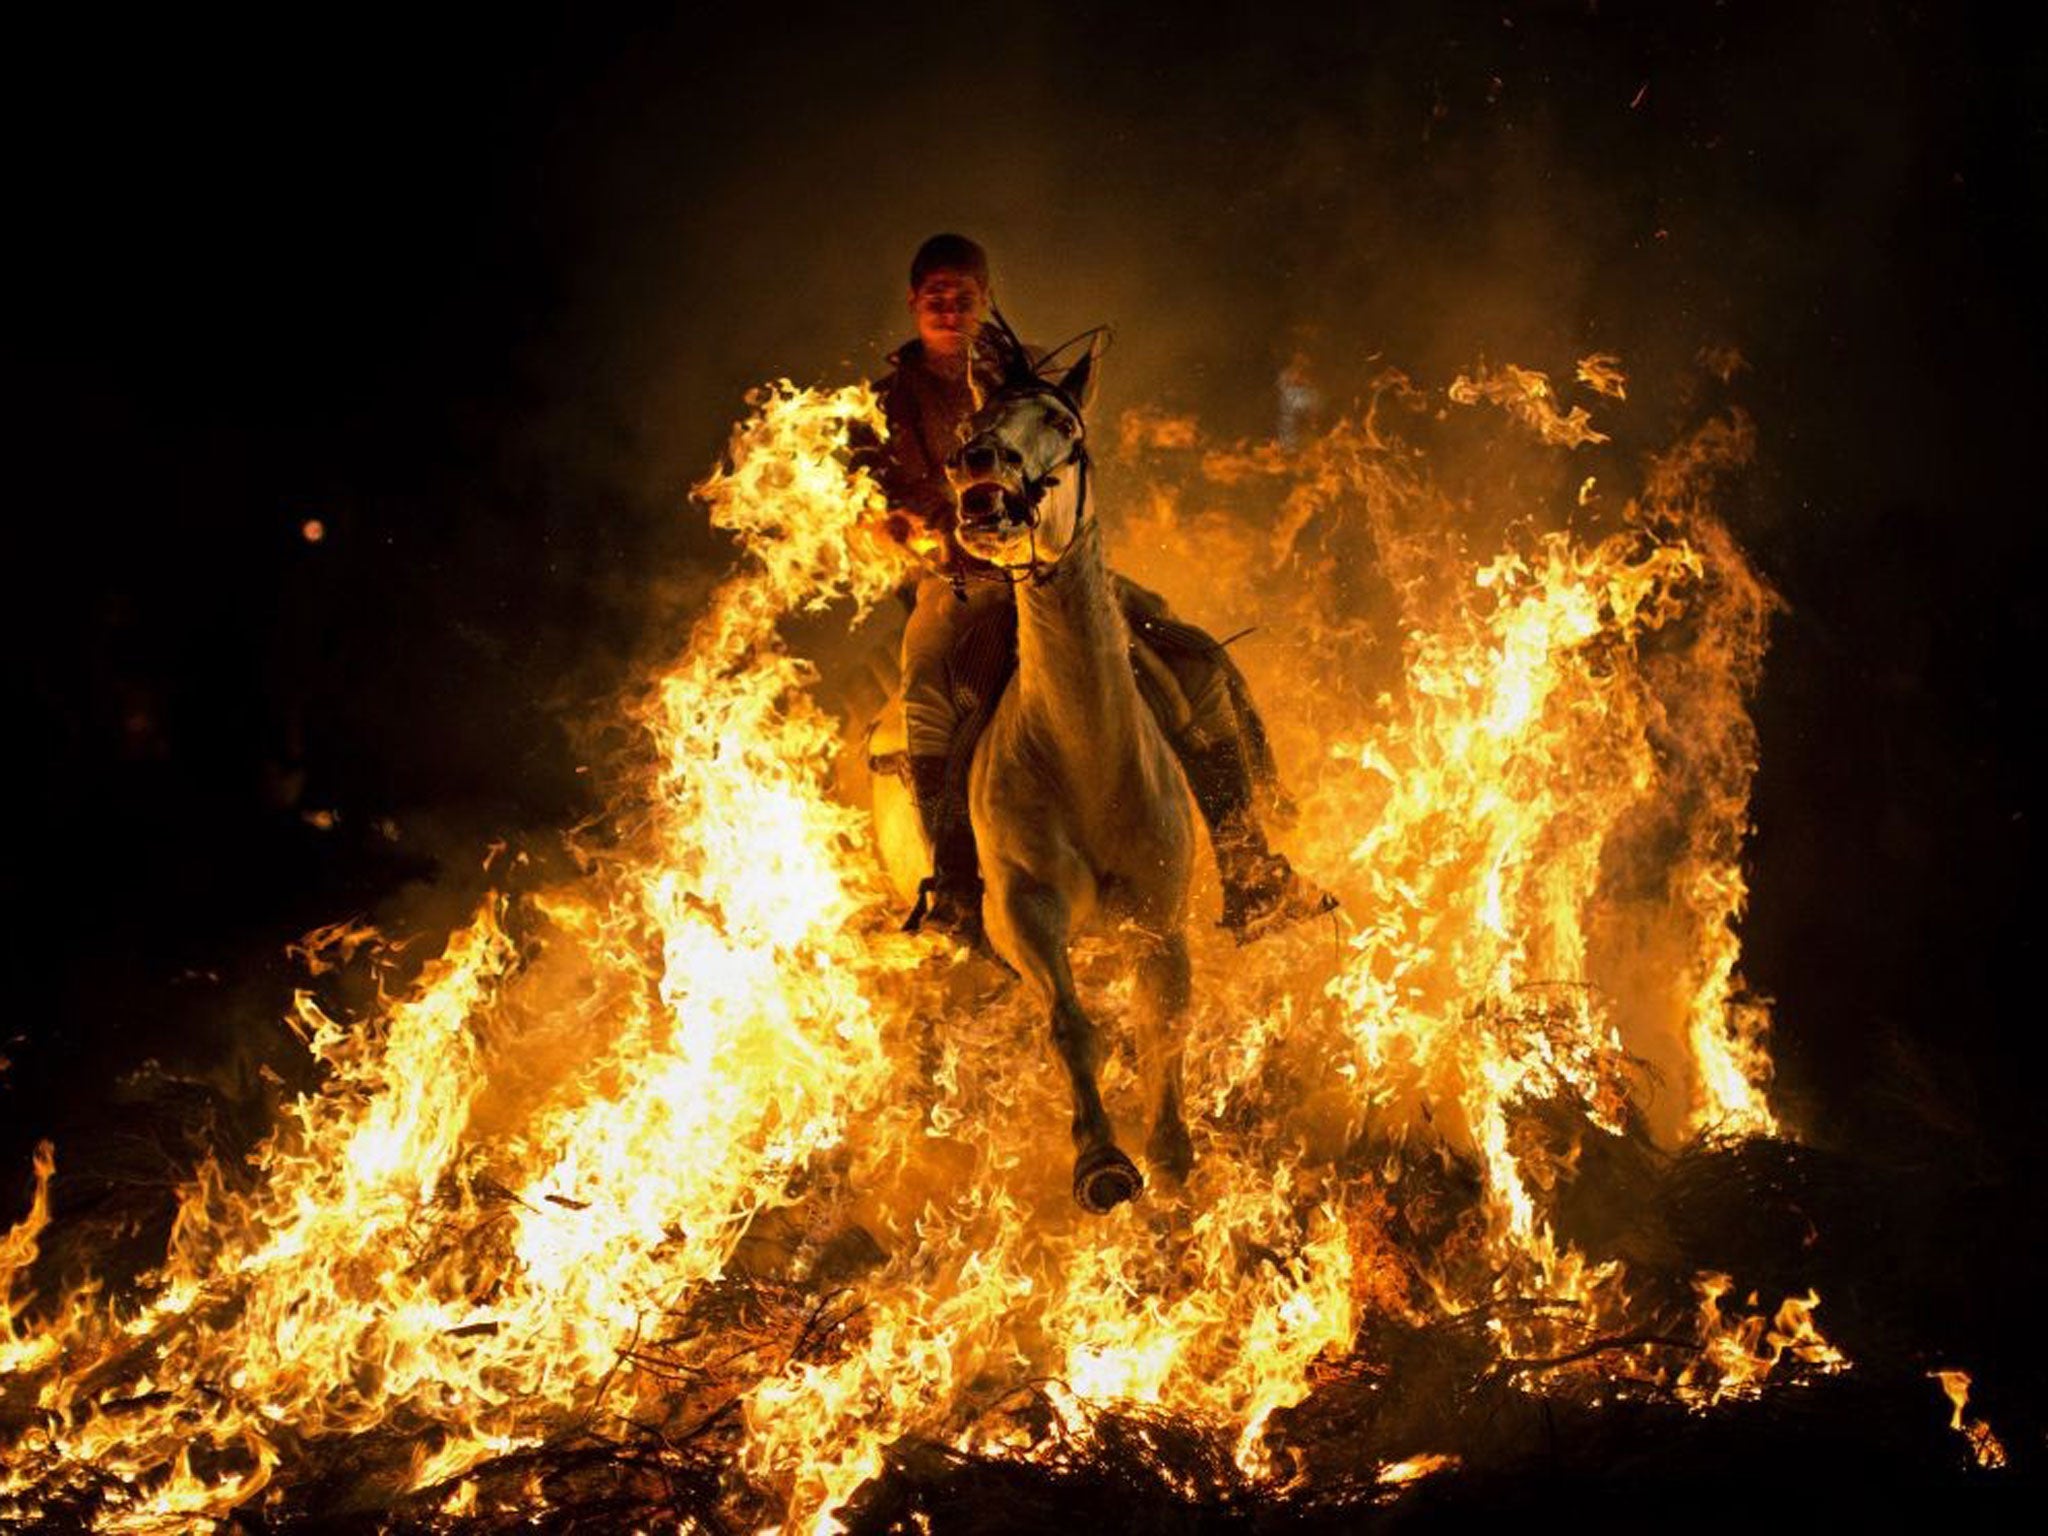 A man rides a horse through a bonfire as part of a ritual in honor of Saint Anthony, the patron saint of animals, in San Bartolome de Pinares, about 100 km west of Madrid